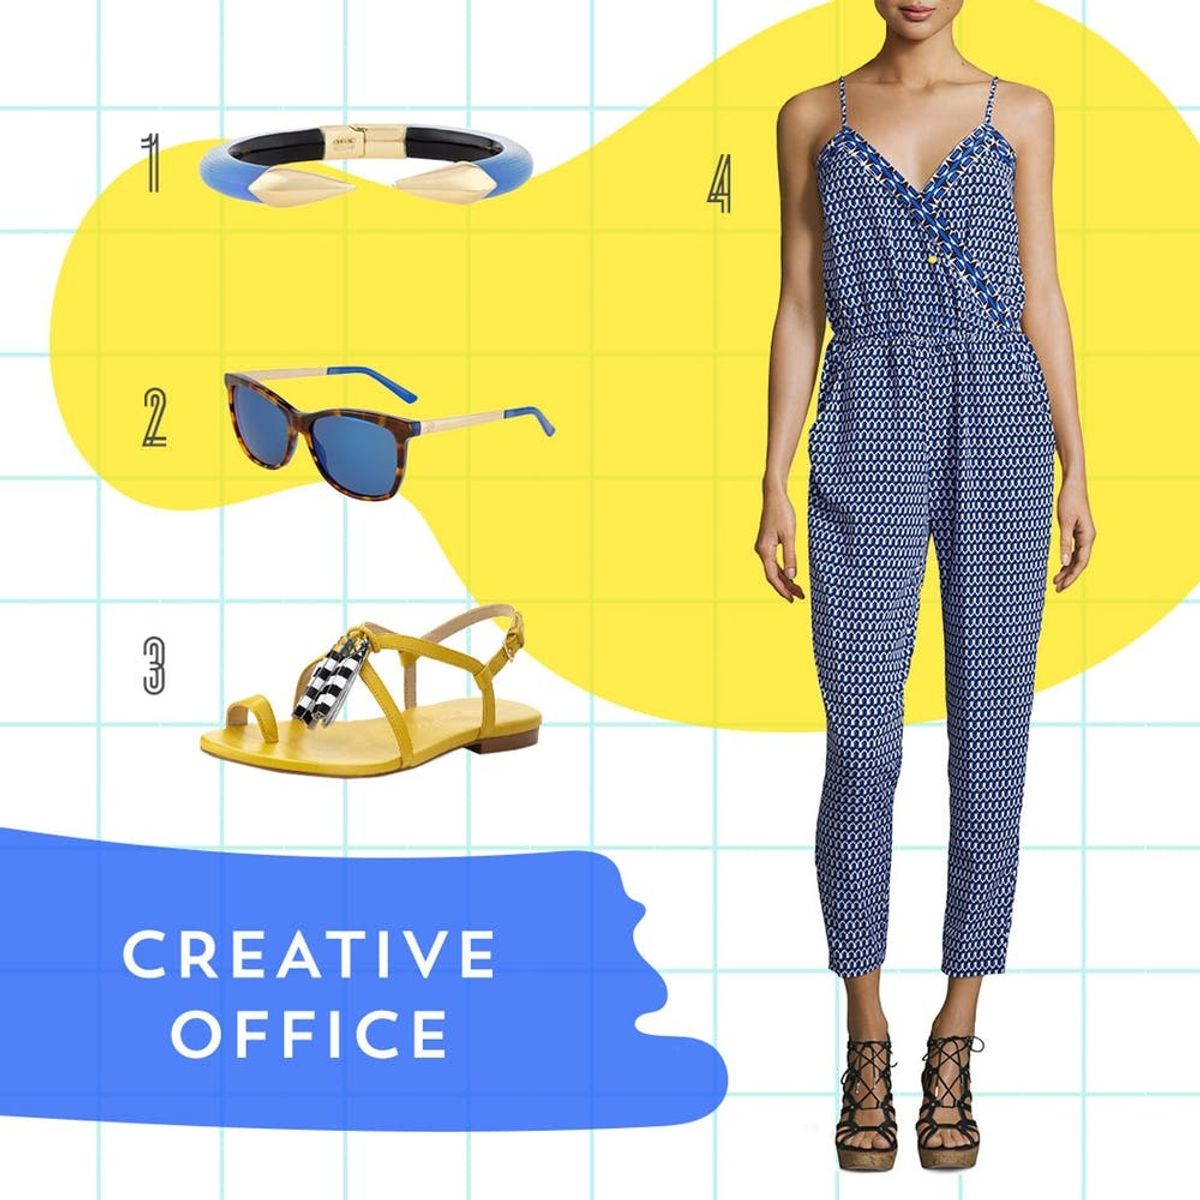 Here’s Your Go-To Guide for This Summer’s Office Attire